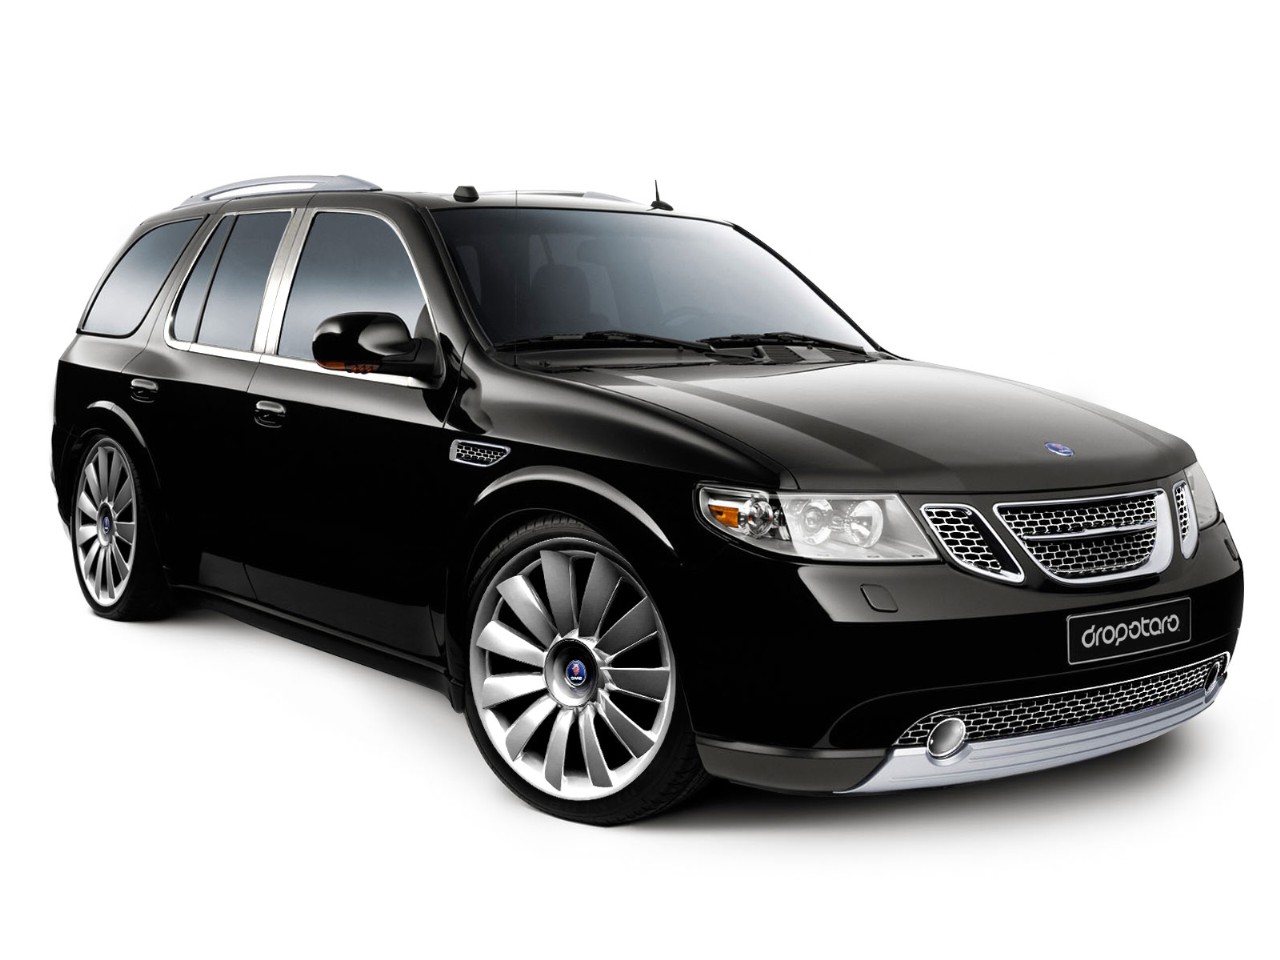 saab 7x related images,51 to 100 - Zuoda Images